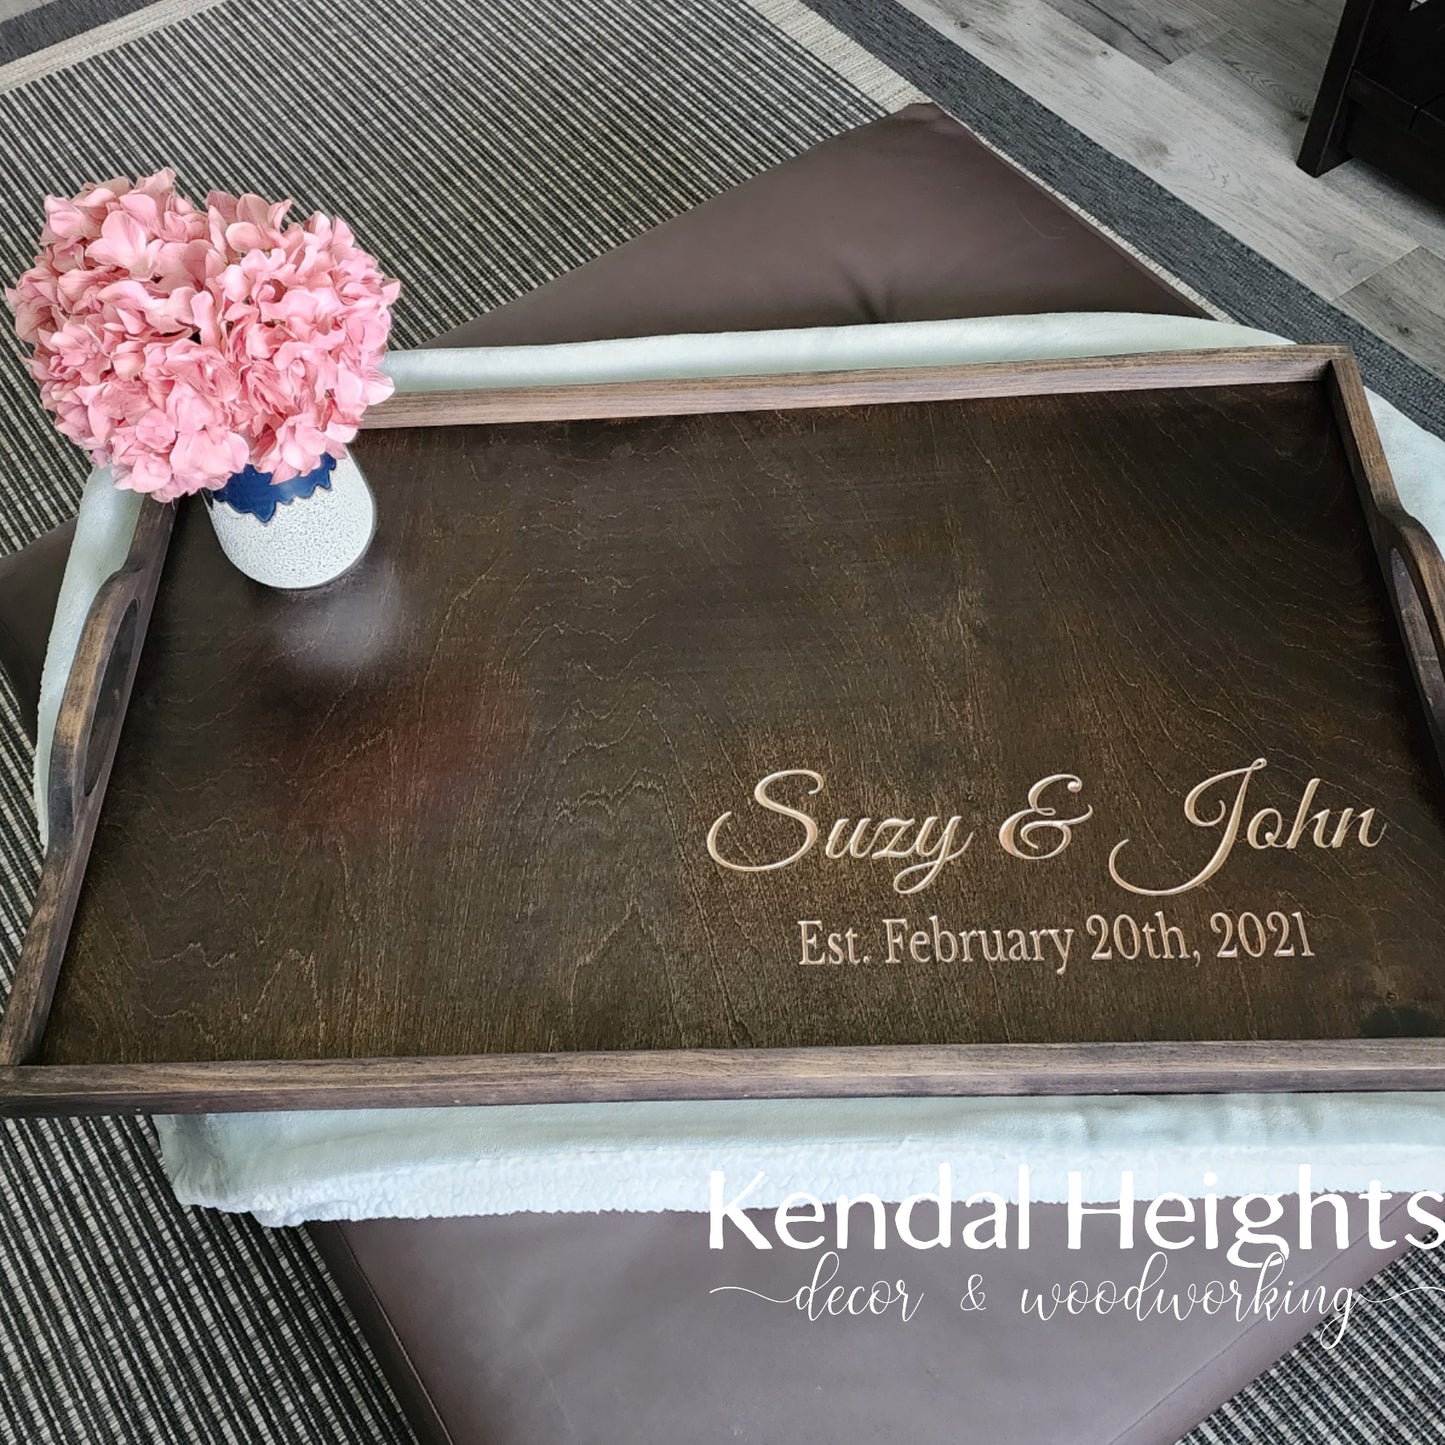 Personalized Tray with wood handles